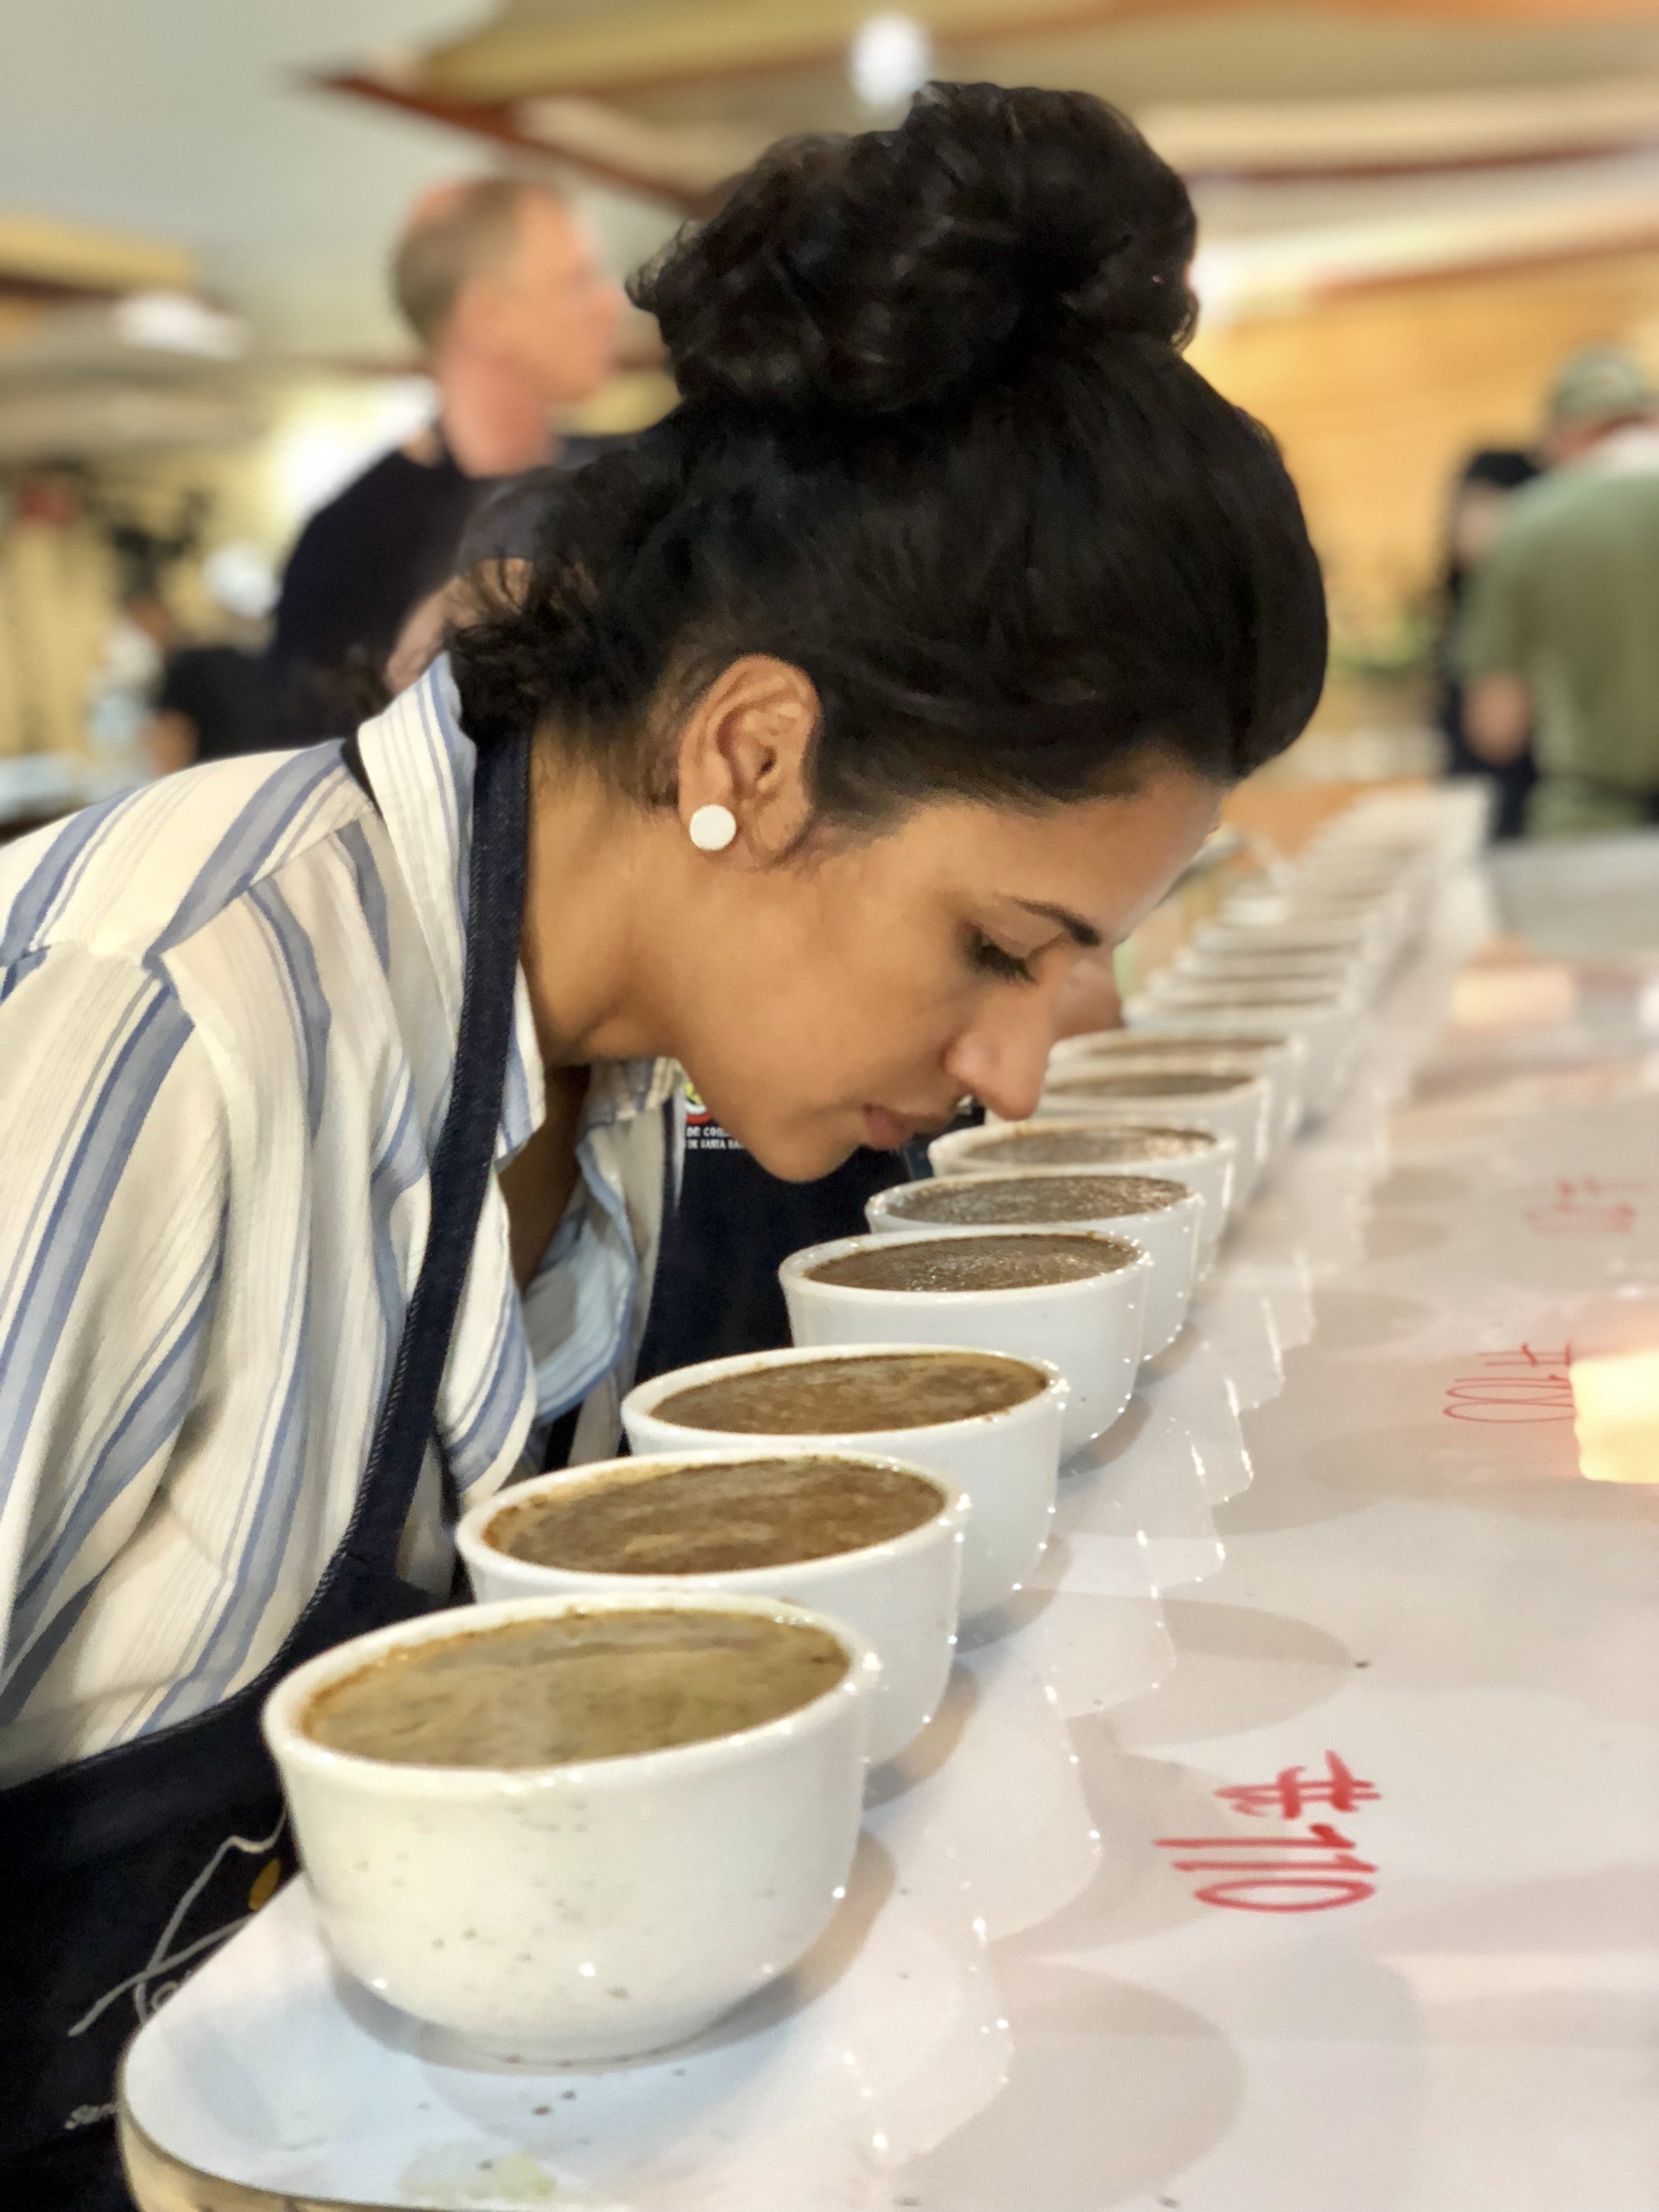 What 'Cupping' Means In The Coffee Industry